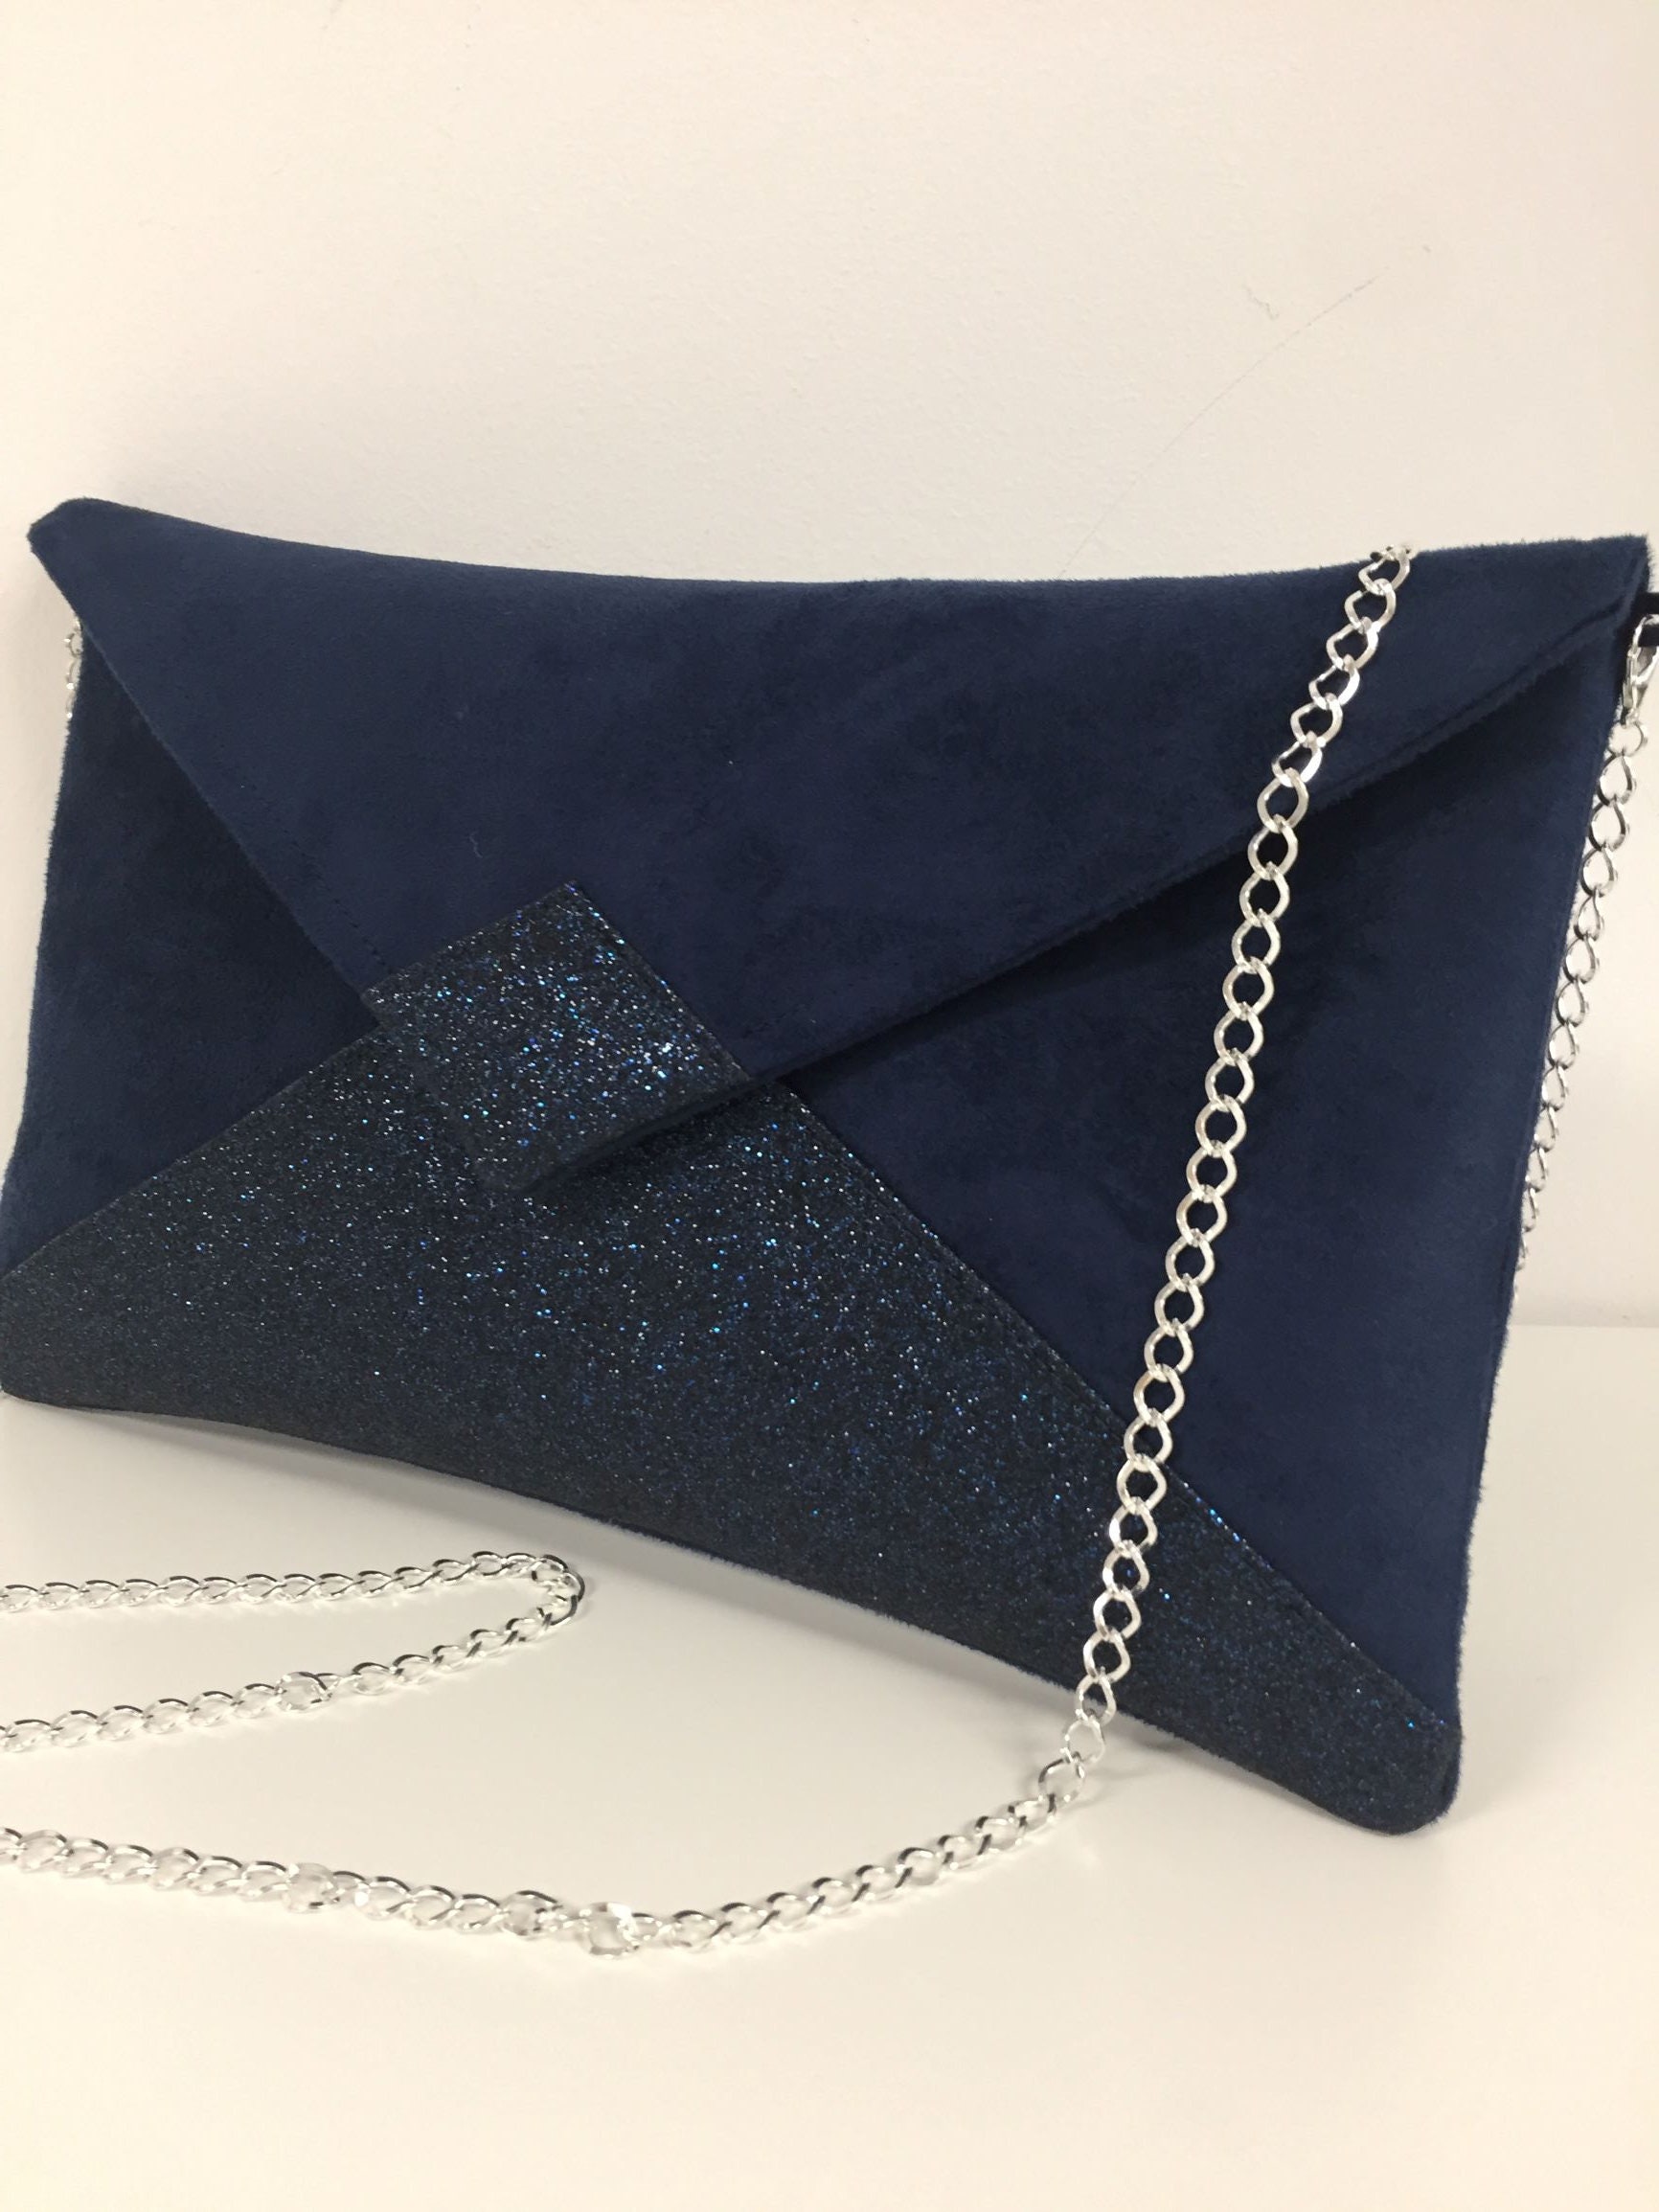 Navy Blue and Coral Wedding Clutch Bag With Gold Glitter / 